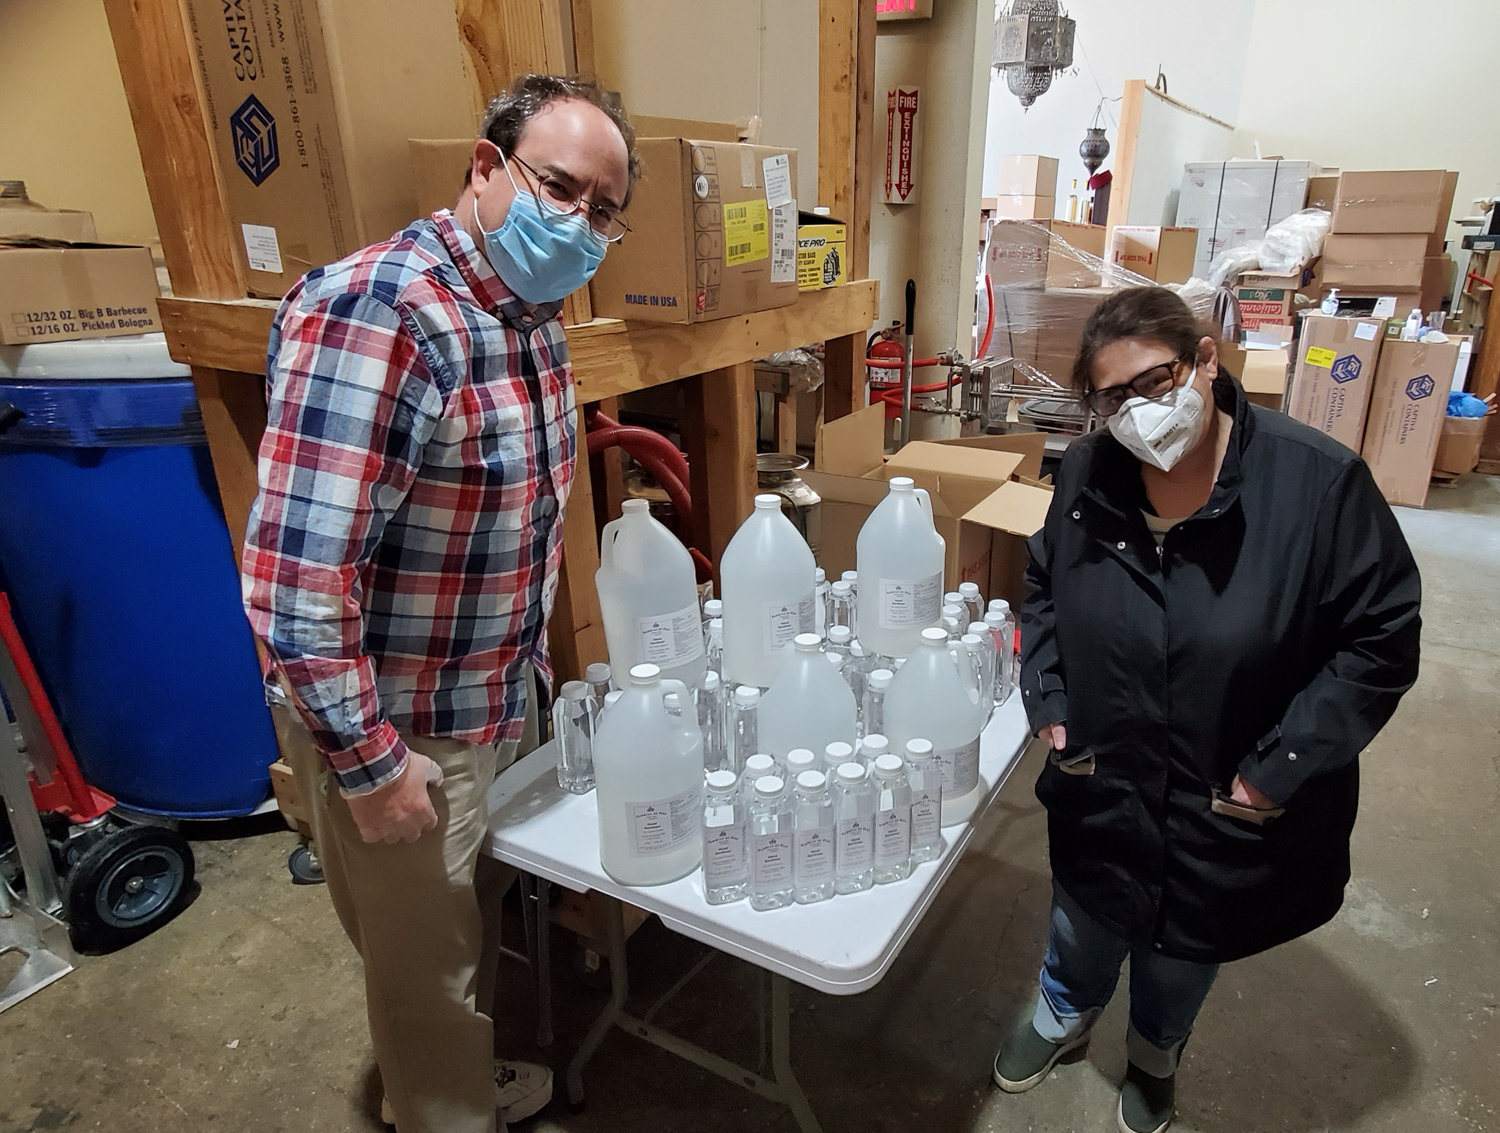 The team at Nahmias et Fils Distillery in Yonkers decided to meet the challenge the coronavirus pandemic posed by ramping up production of hand sanitizer, which has been particularly difficult to find on store shelves. David and Dorit Nahmias, who live in North Riverdale, own the distillery.